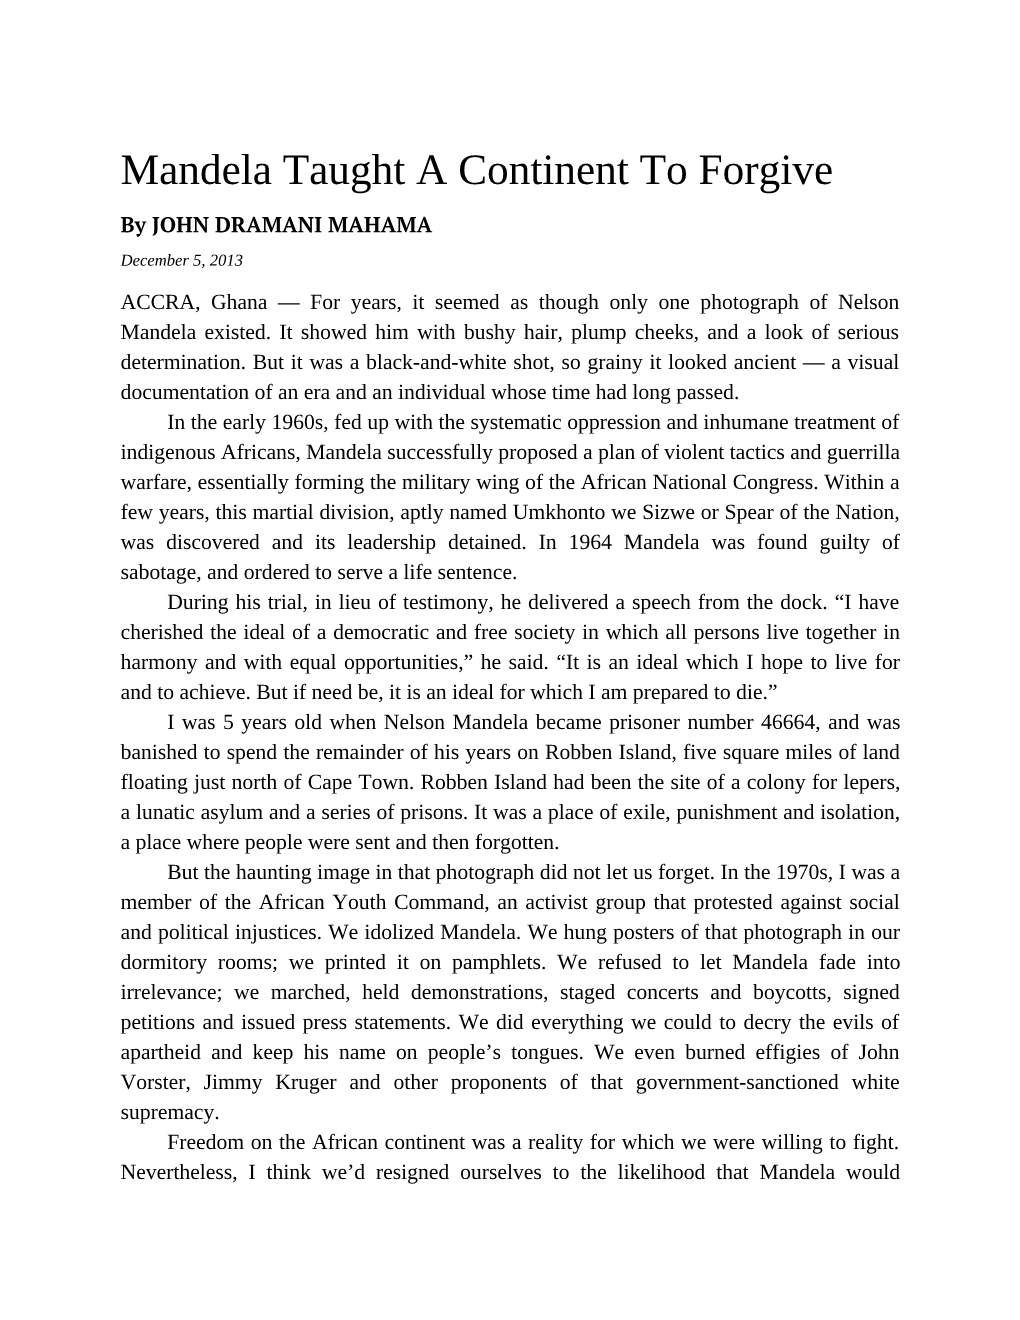 Mandela Taught a Continent to Forgive